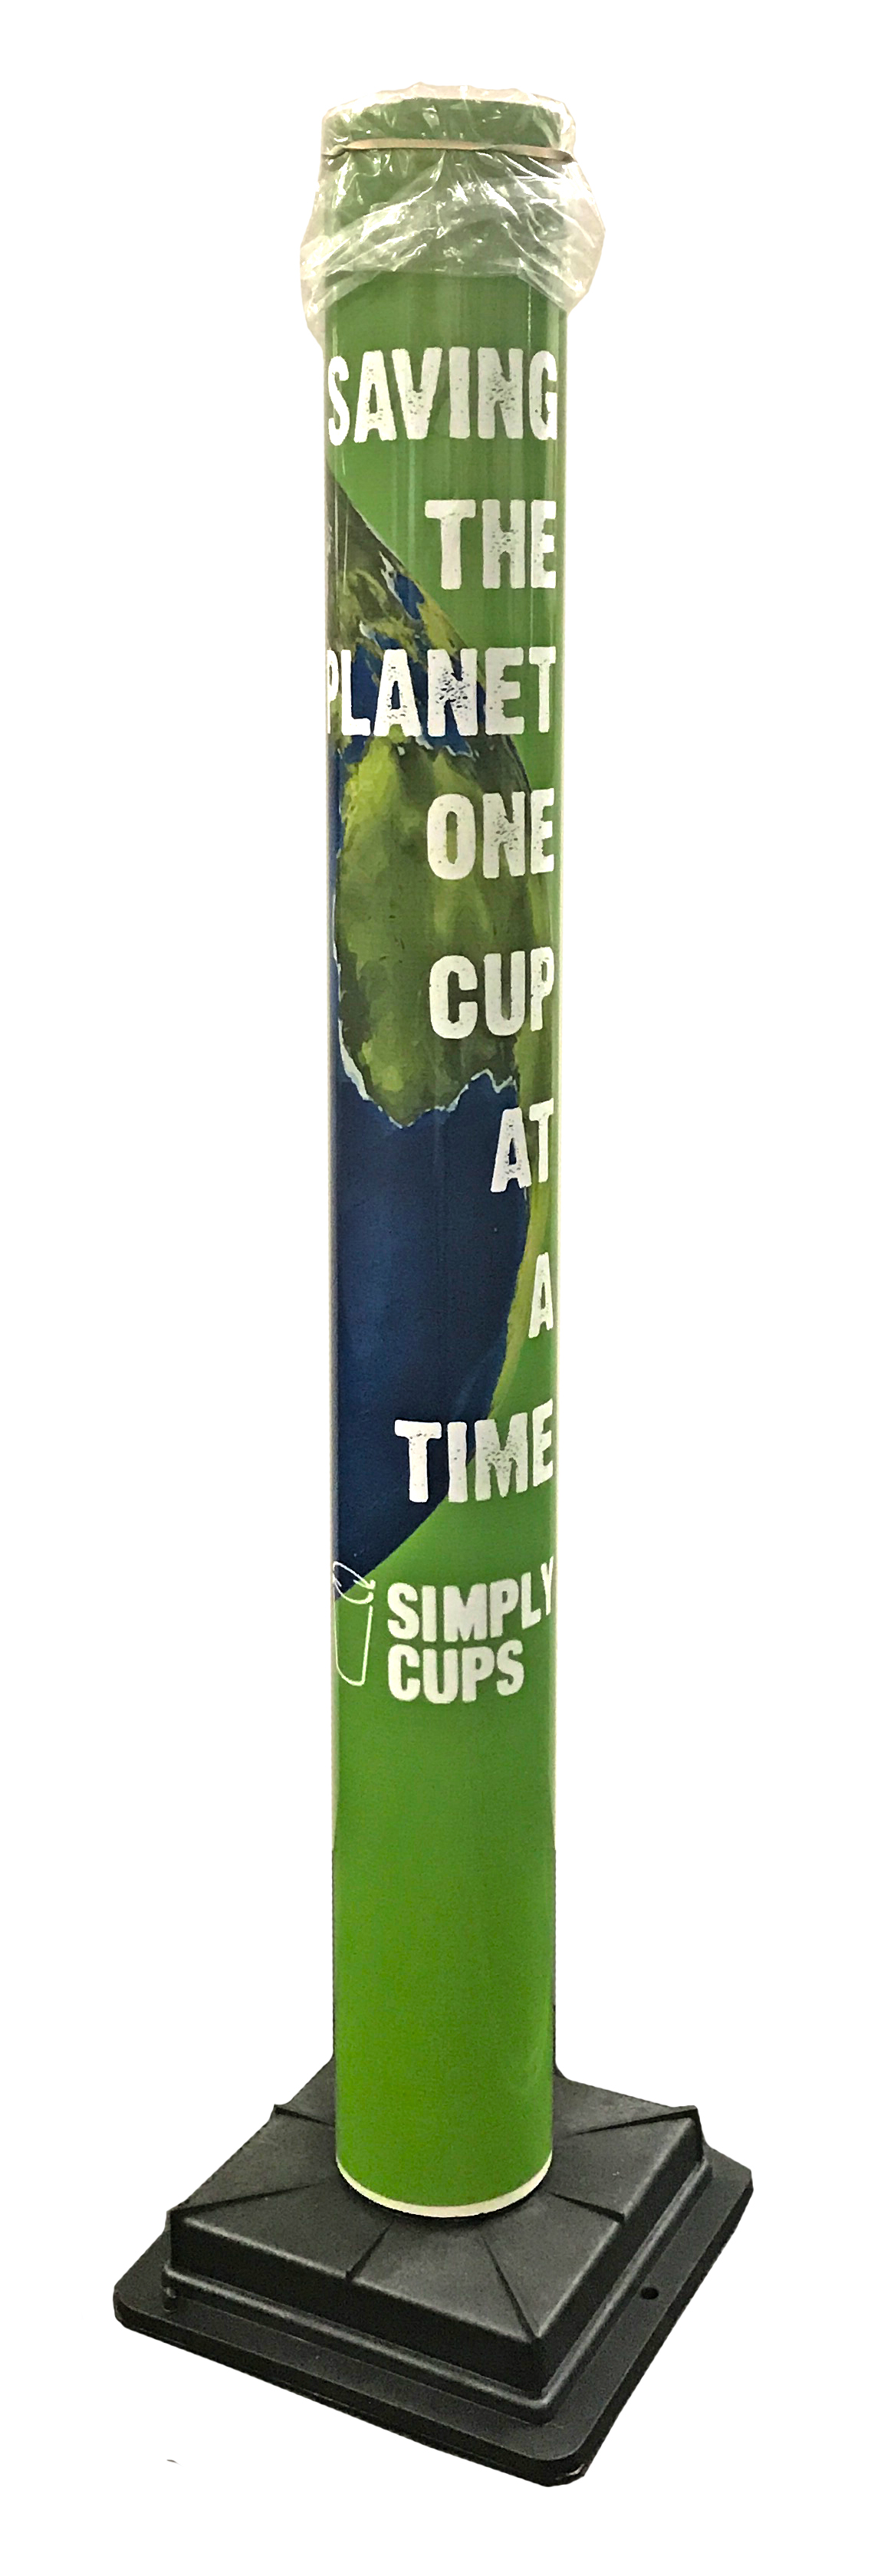 The cup recycling tube.